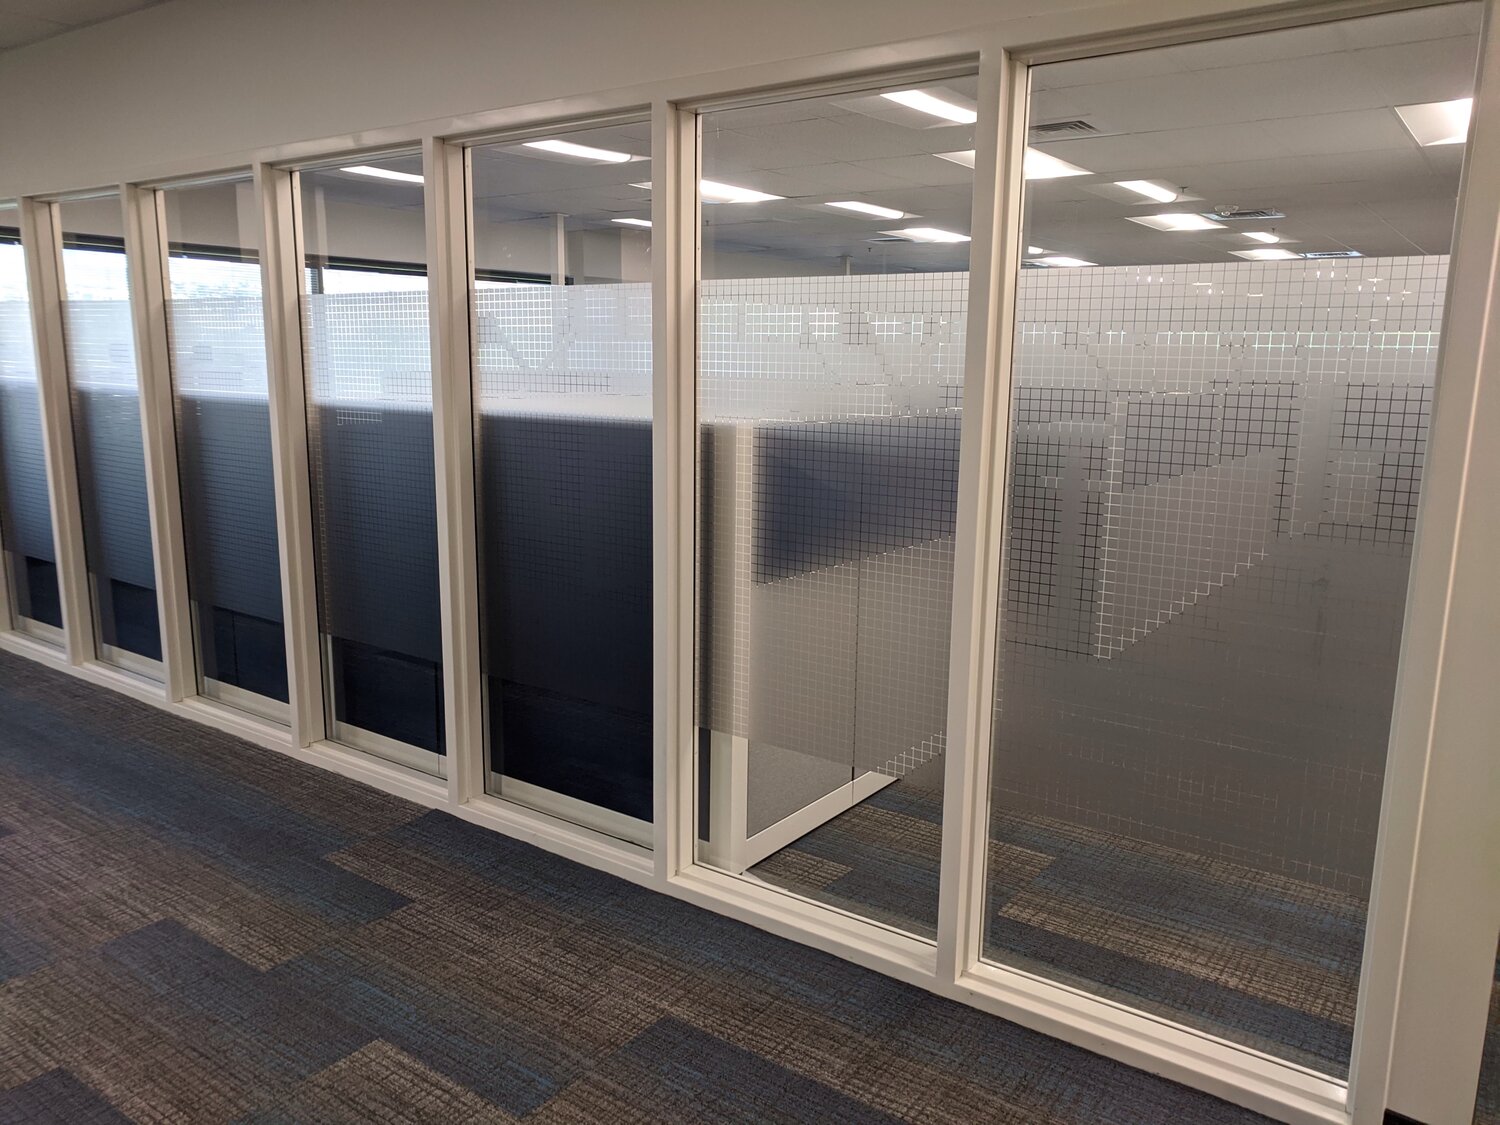 Commercial window film for privacy at offices